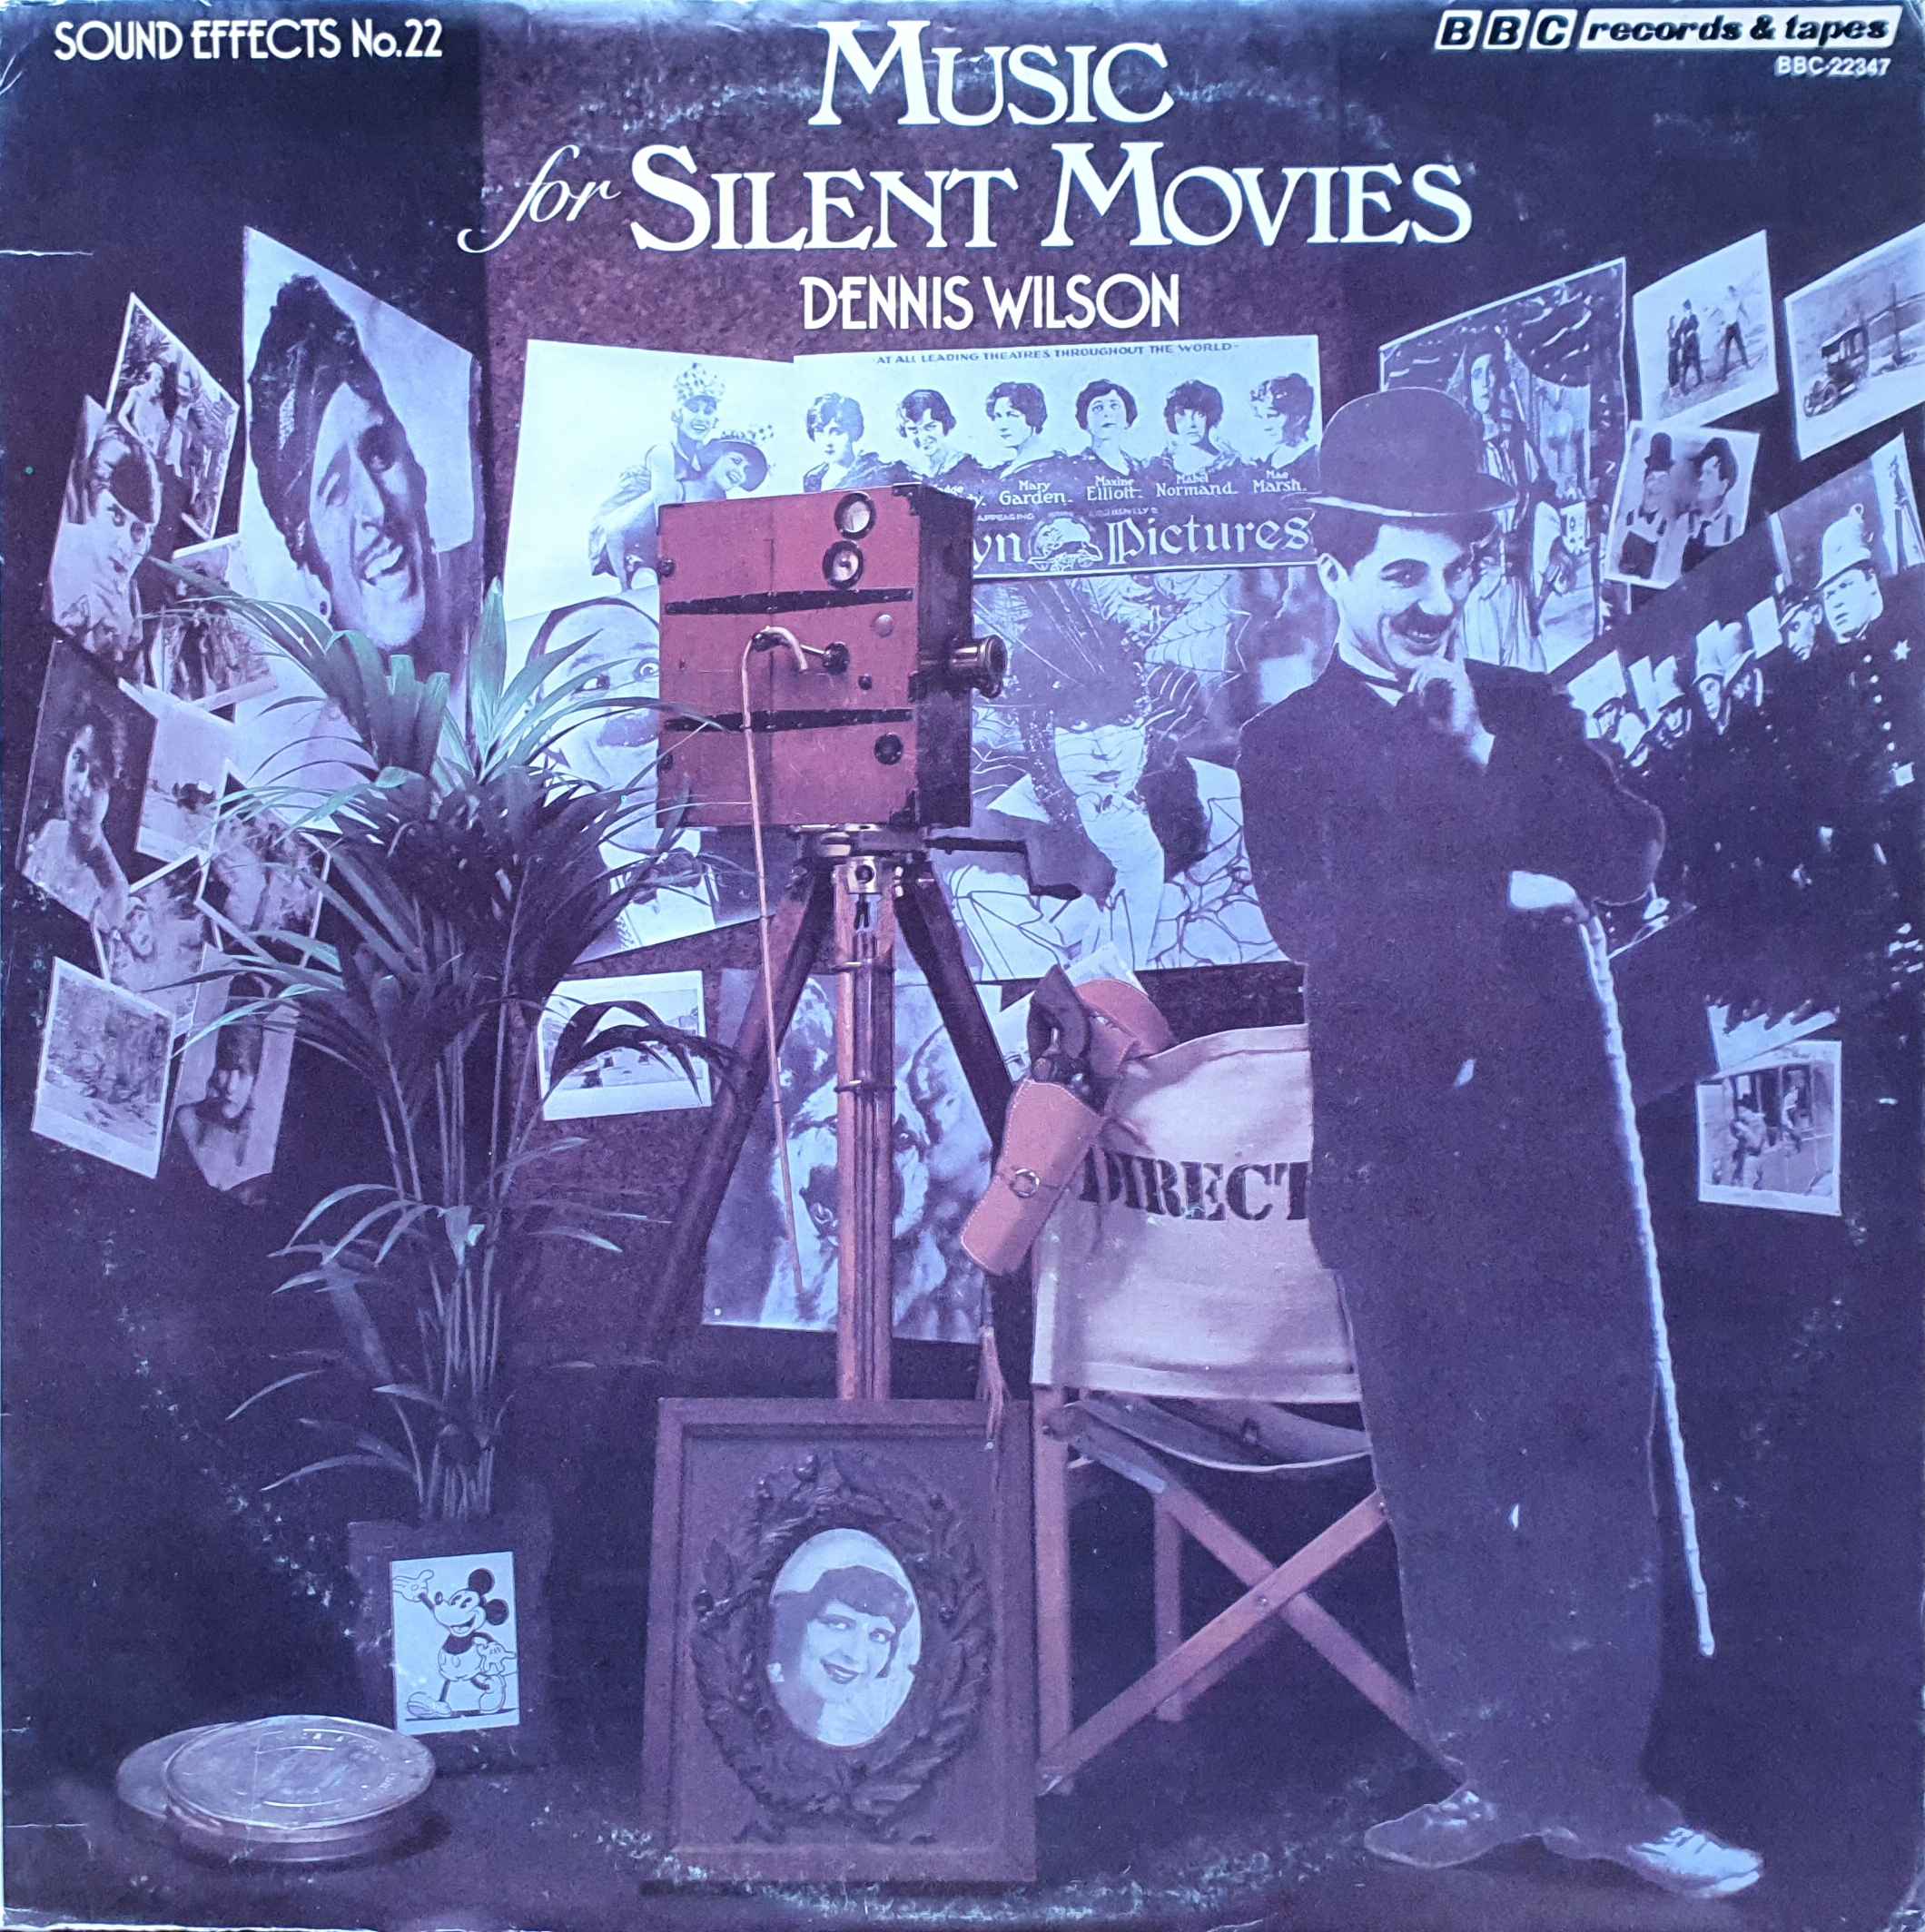 Picture of BBC - 22347 Music for silent movies by artist Various from the BBC albums - Records and Tapes library